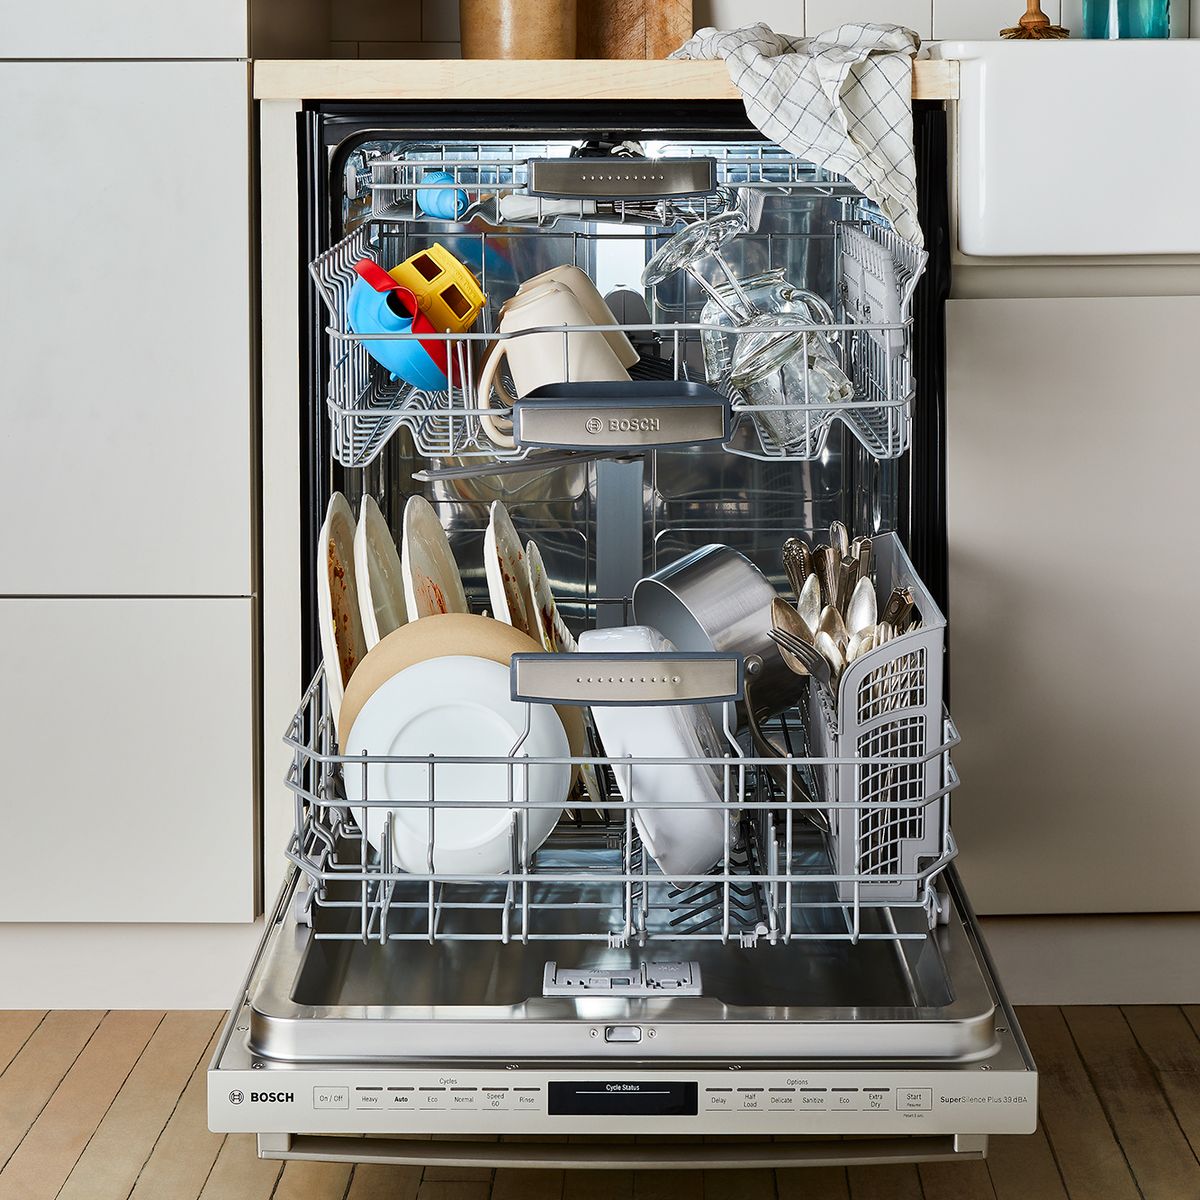 Items To Avoid Putting In Your Dishwasher